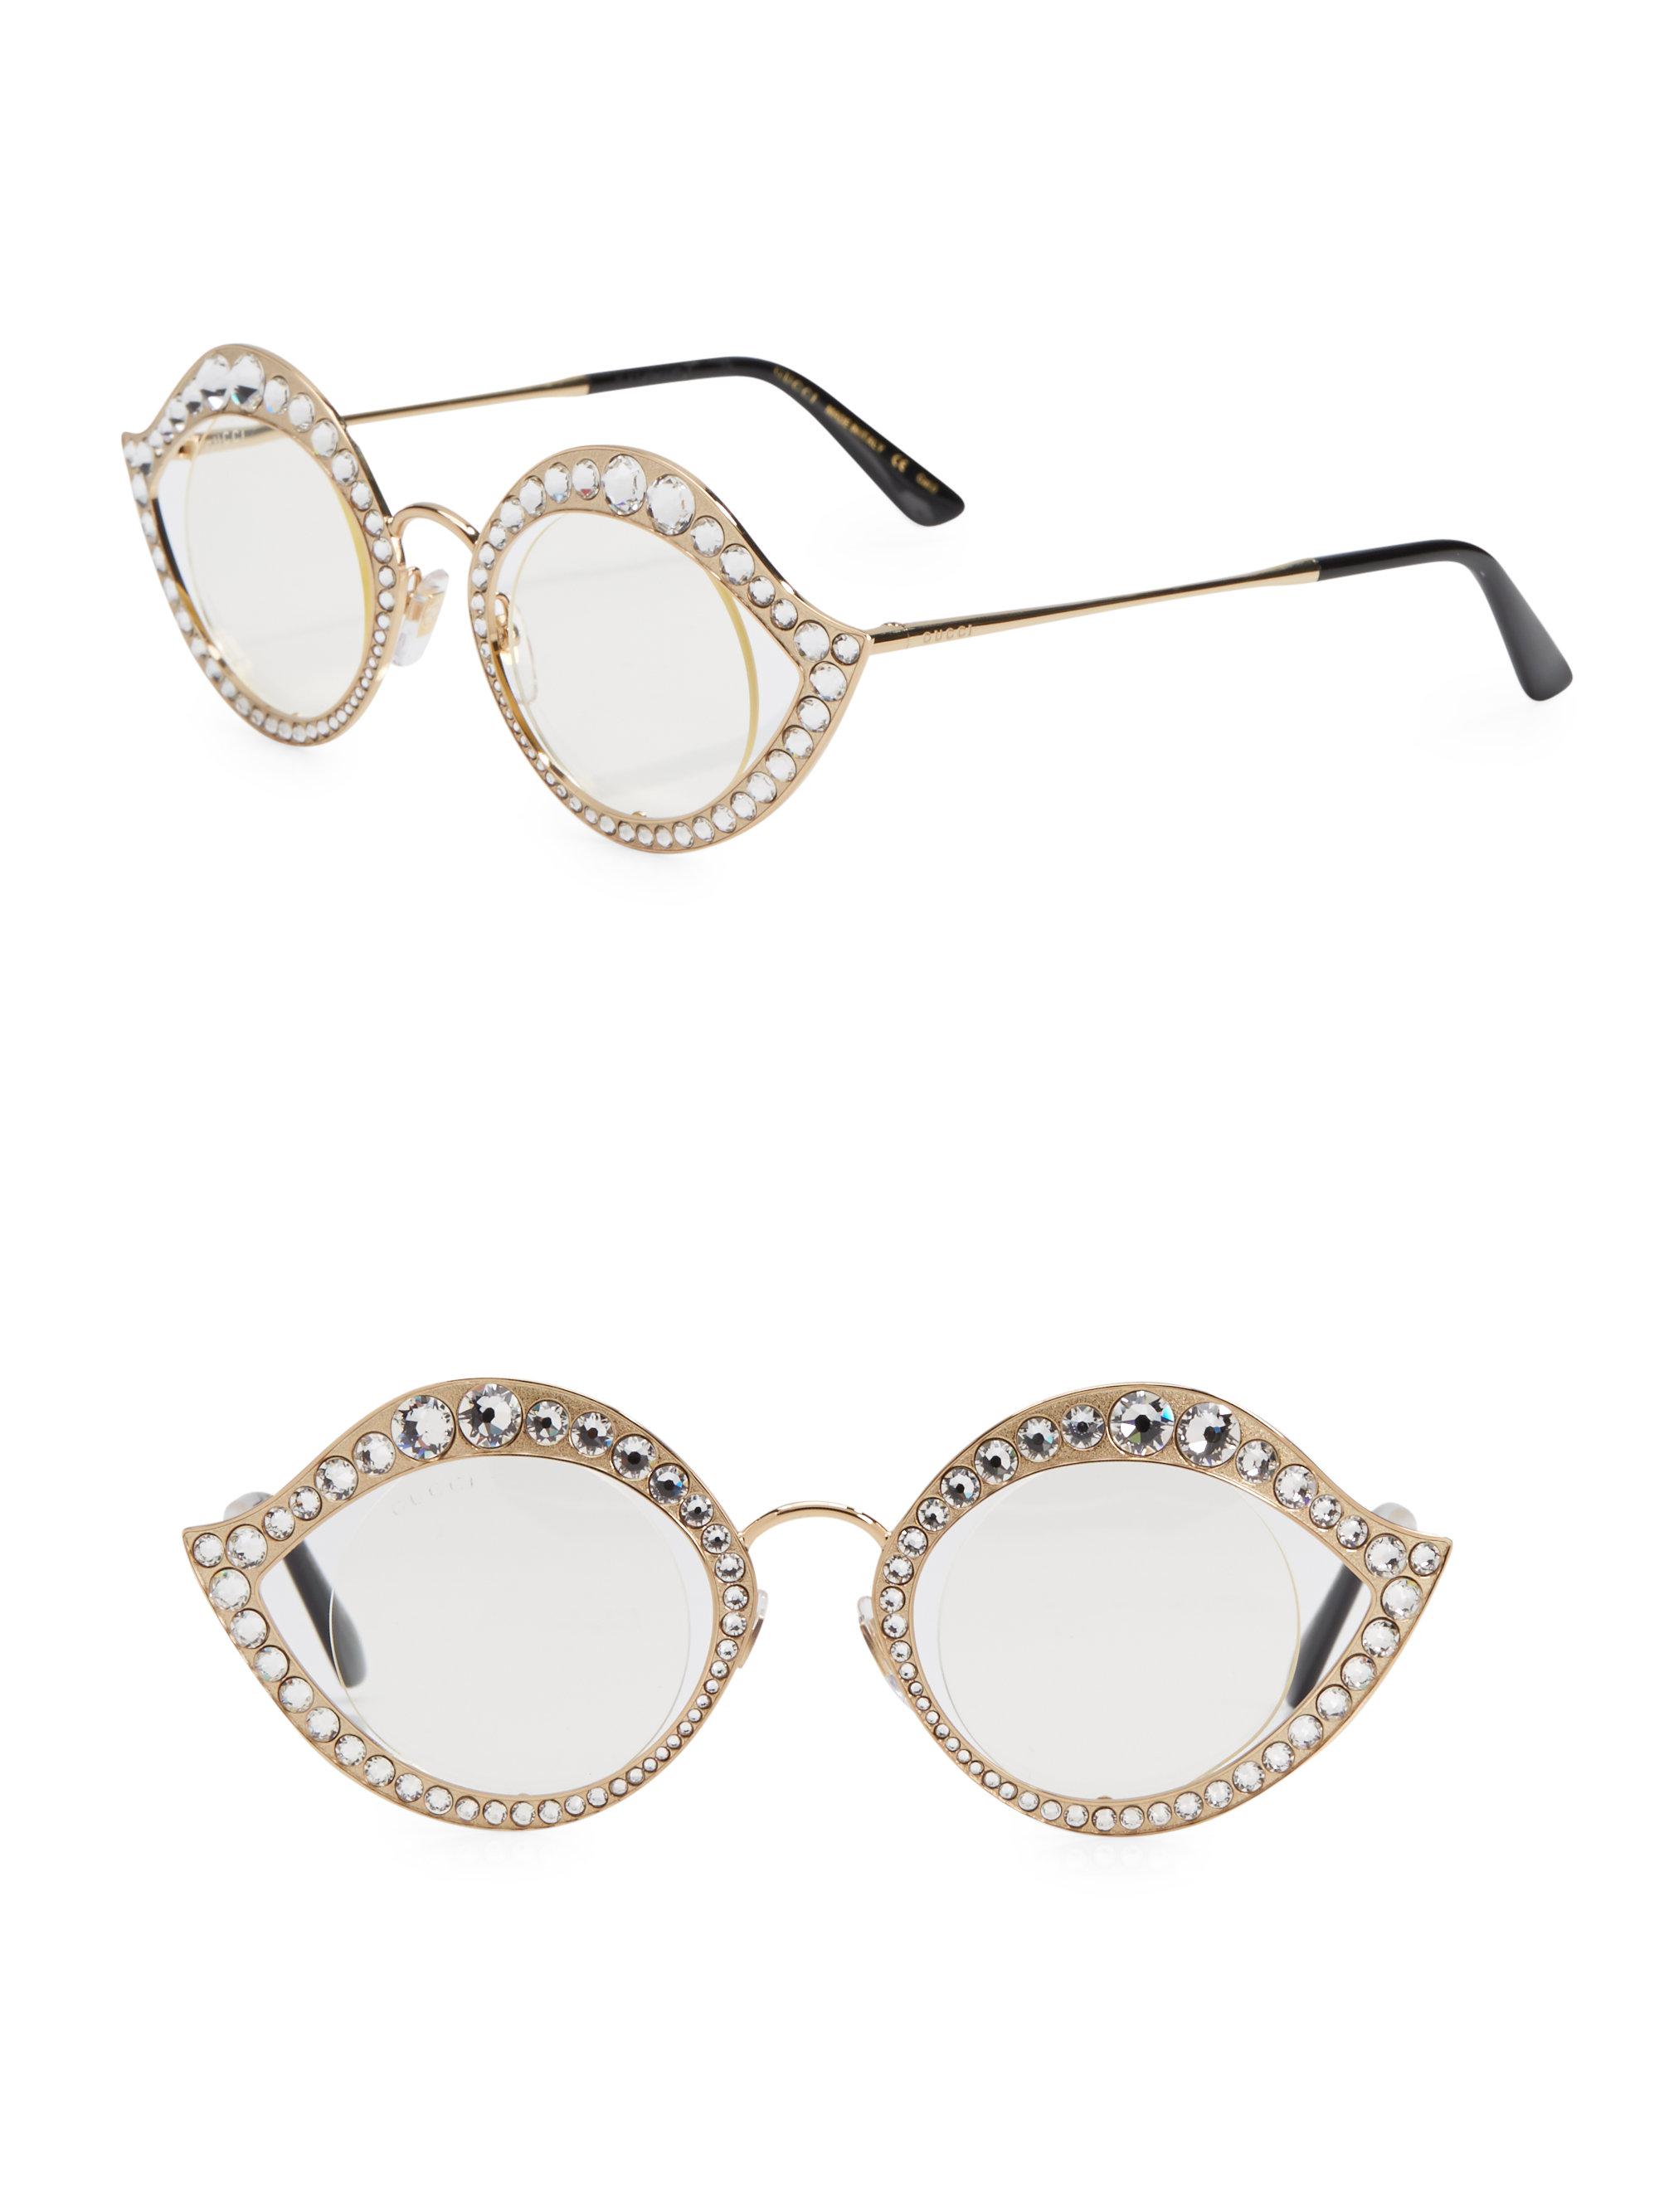 Gucci Crystal-studded Cat Eye Glasses in Metallic | Lyst